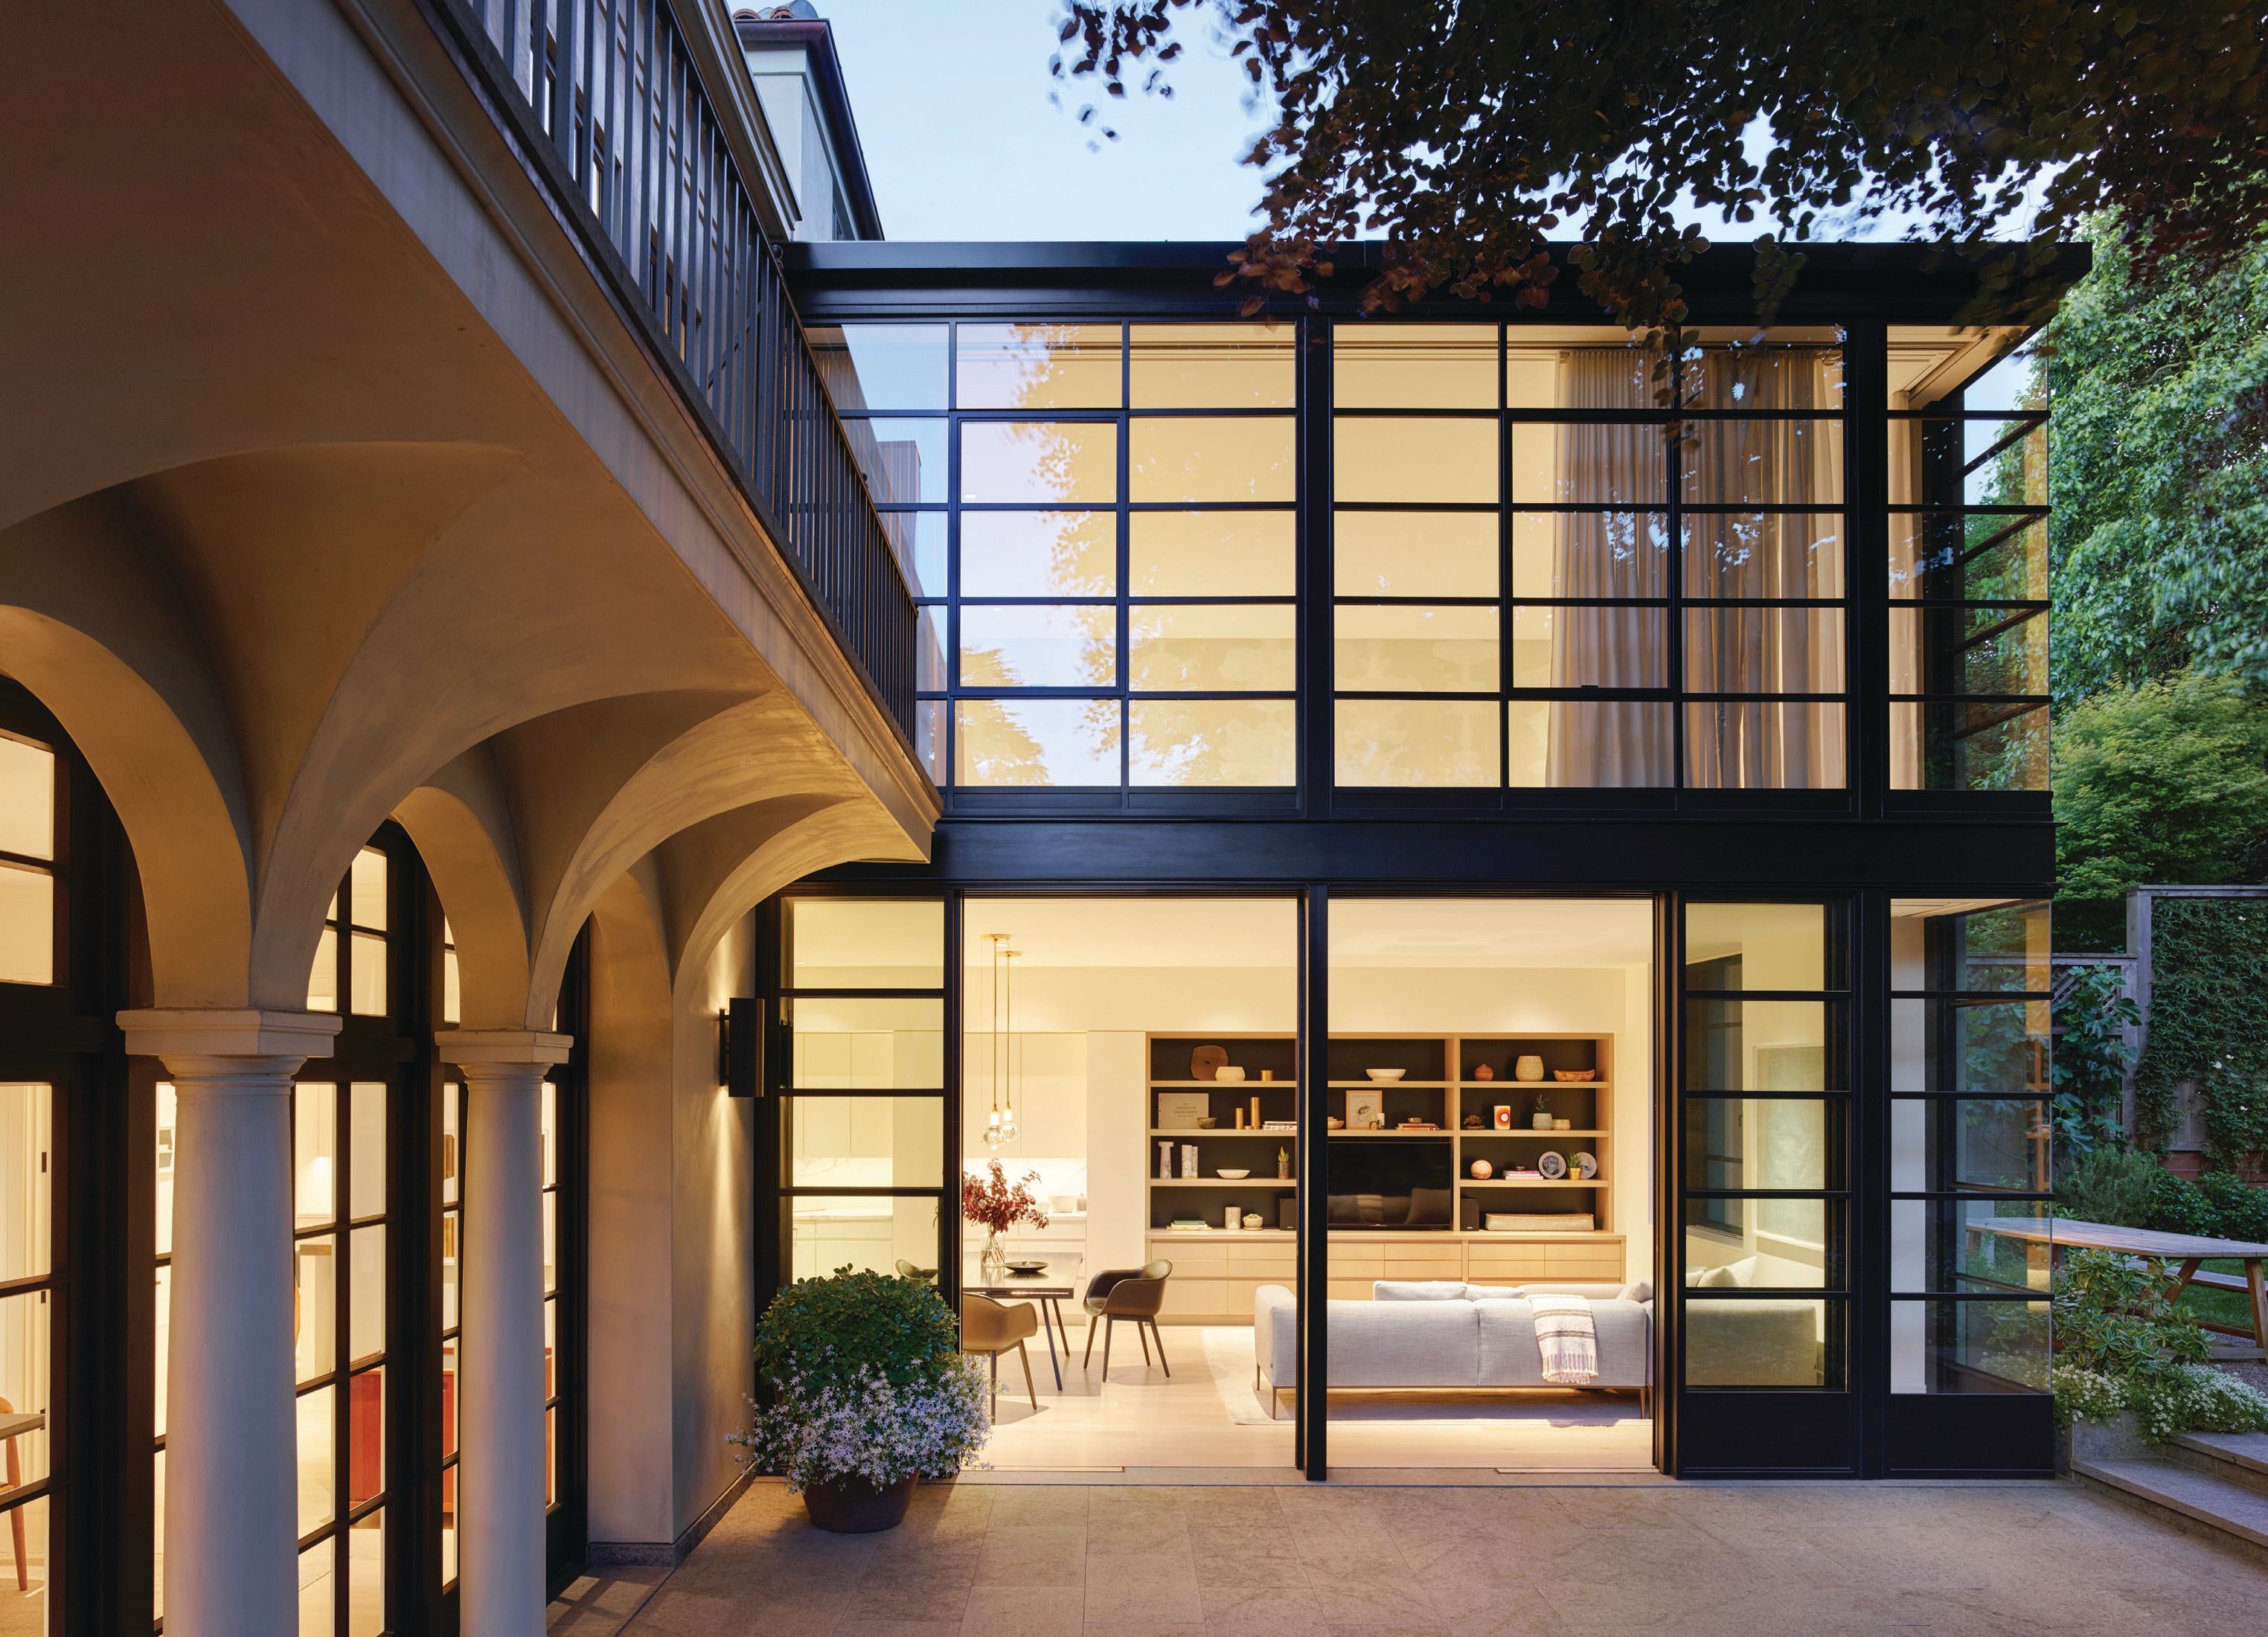 A soaring Pacific Heights home designed by Walker Warner Architects PHOTO COURTESY OF WALKER WARNER ARCHITECTES